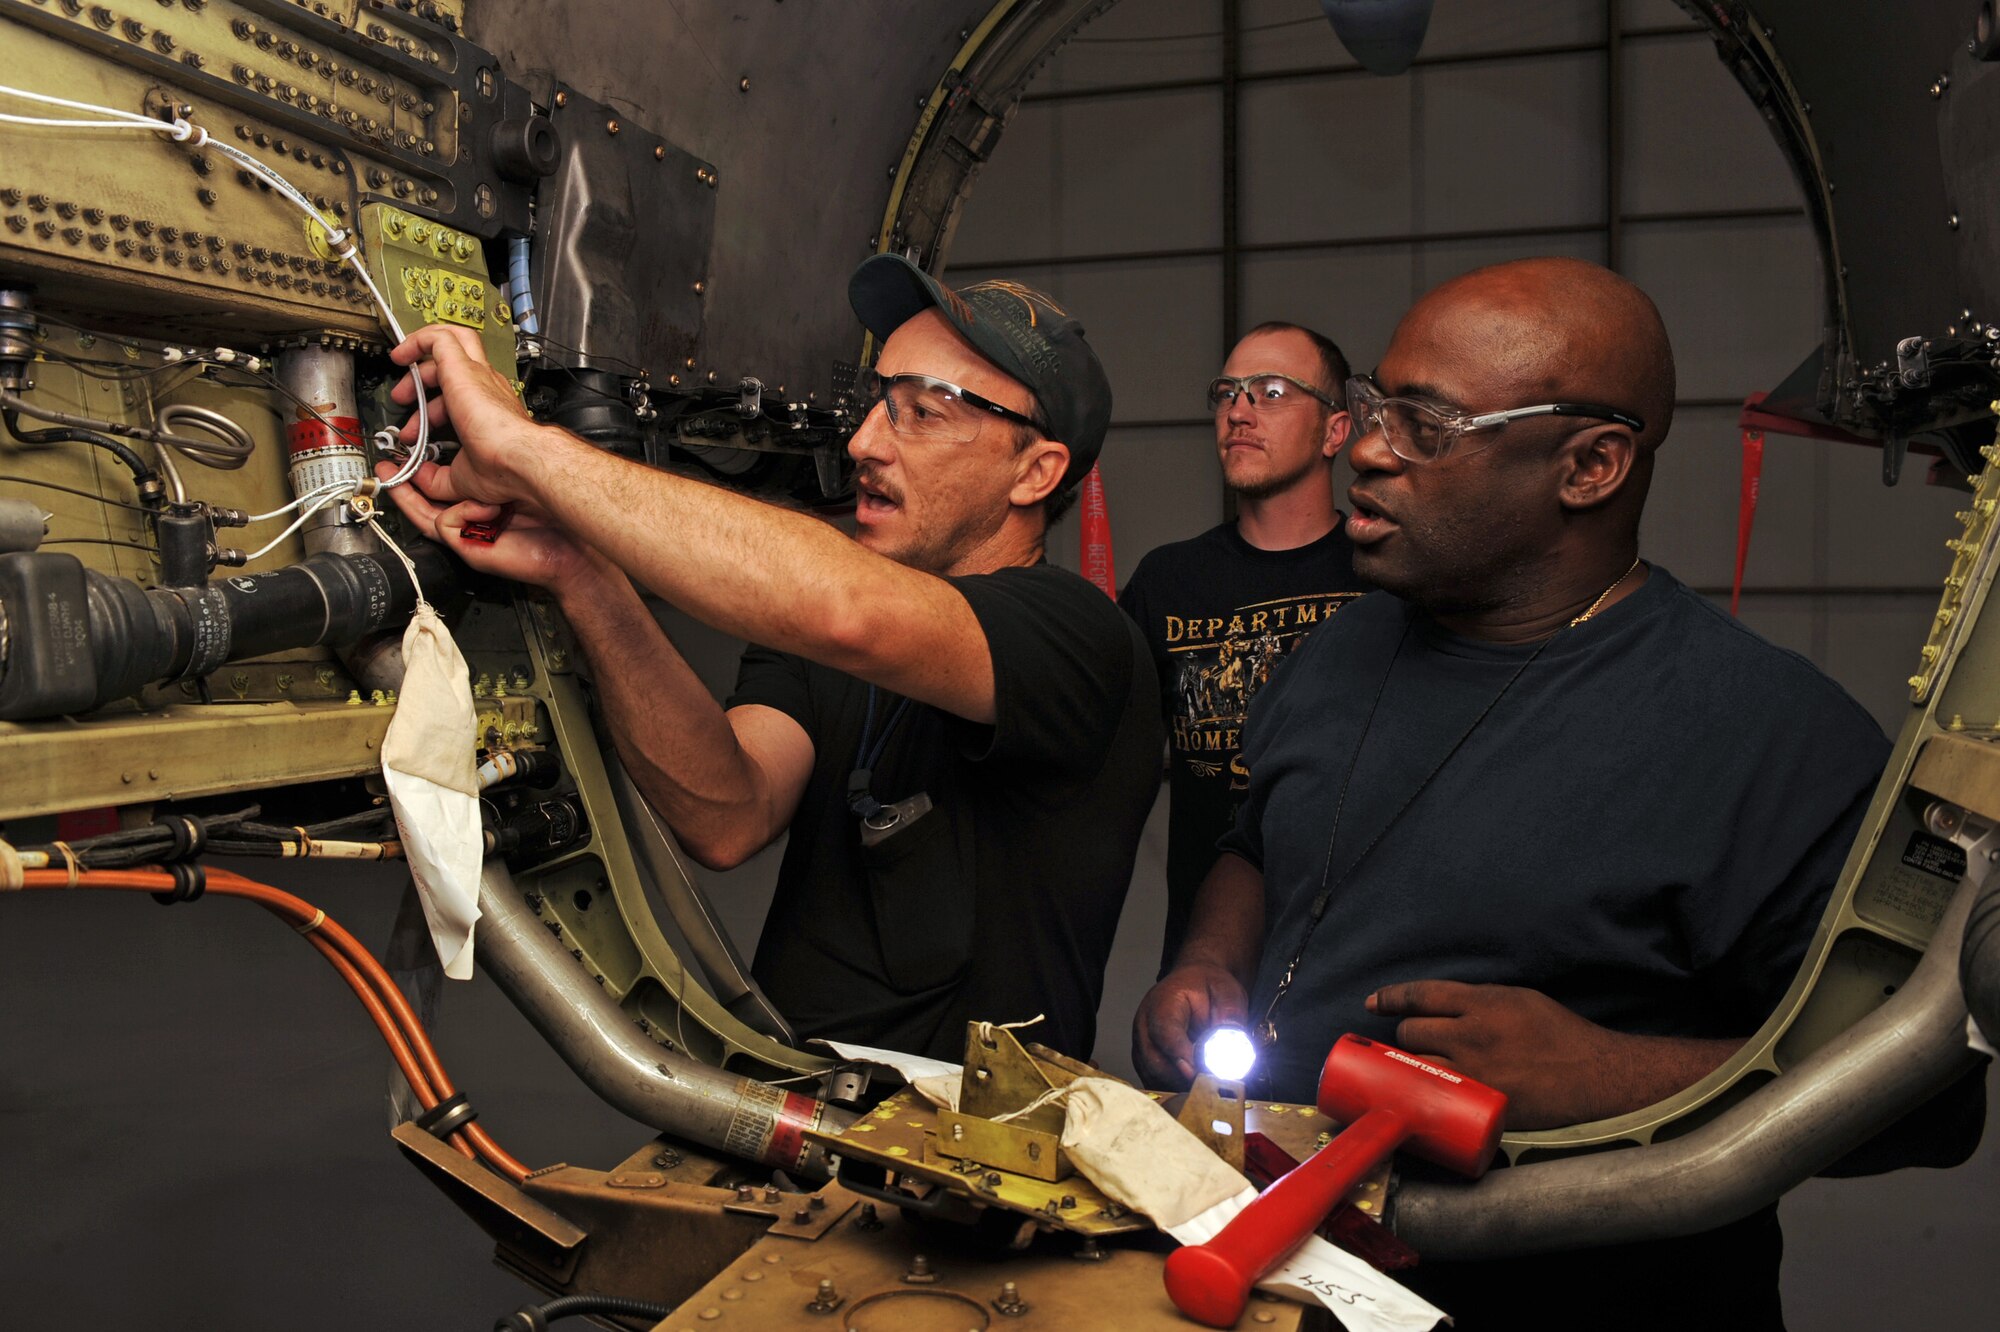 U.S. Air Force civilians Robert Bliven and Andrew Bakios, 567th Aerospace Maintenance and Regeneration Squadron perform maintenance on the first QF-16 being regenerated at the 309th Aerospace Maintenance and Regeneration Group at Davis-Monthan Air Force Base, Ariz., July 9, 2013. The conversion is slated to take approximately six months, or 180 calendar days, to produce an F-16 for delivery to Cecil Field in Jacksonville, Fla., where Boeing will install the QF-16 drone modification package. (U.S. Air Force photo by Senior Airman Christine Griffiths/Released)